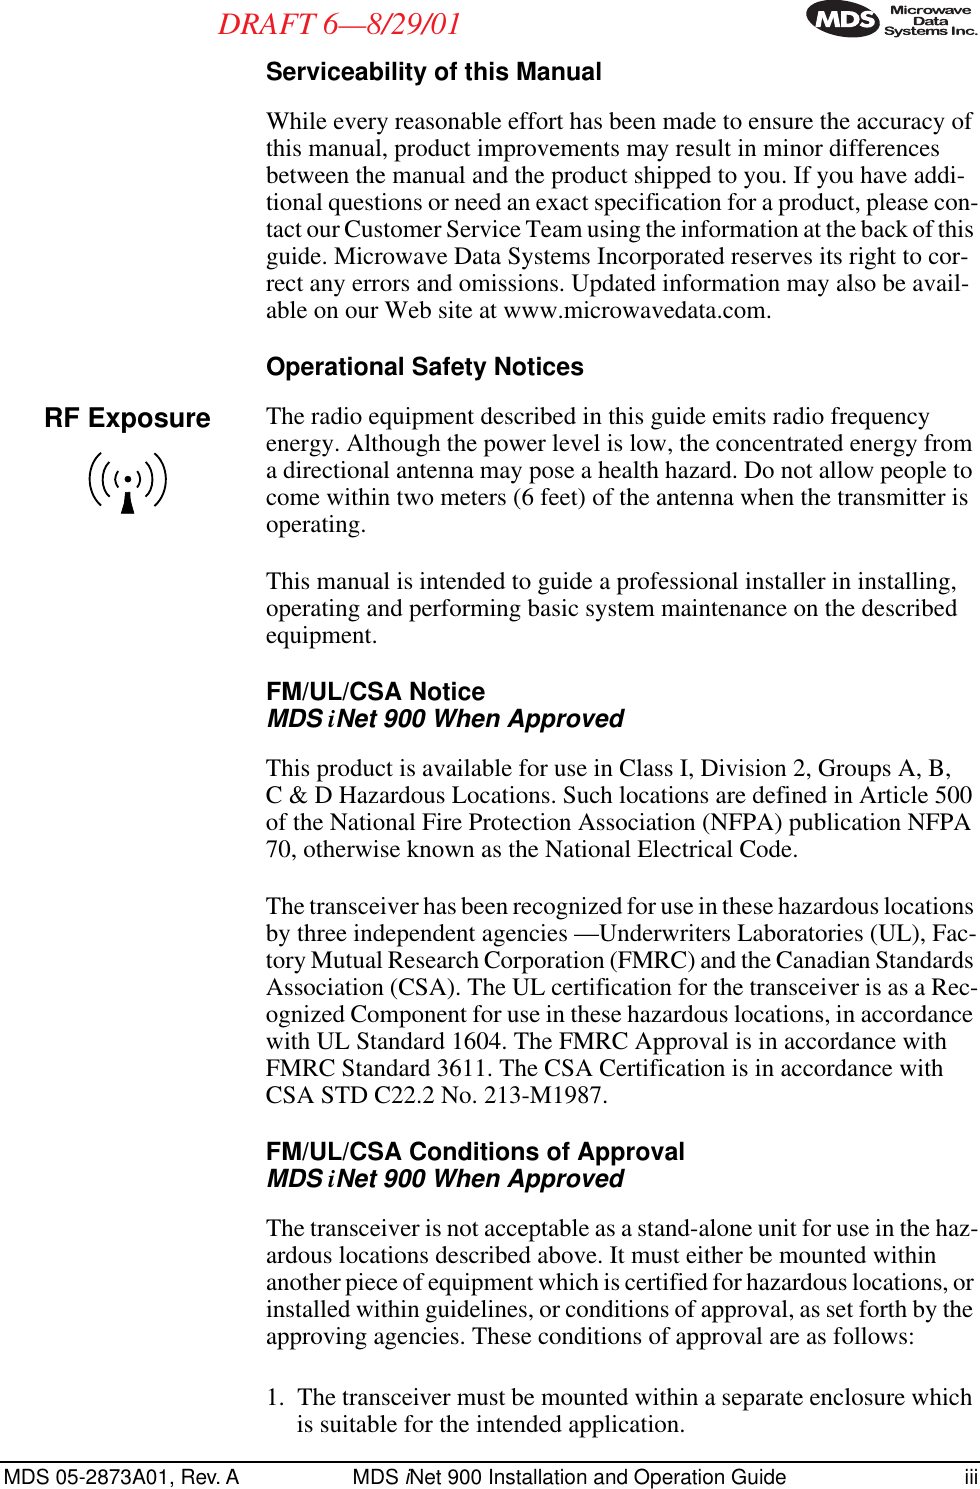  MDS 05-2873A01, Rev. A MDS  i Net 900 Installation and Operation Guide iii DRAFT 6—8/29/01 Serviceability of this Manual While every reasonable effort has been made to ensure the accuracy of this manual, product improvements may result in minor differences between the manual and the product shipped to you. If you have addi-tional questions or need an exact specification for a product, please con-tact our Customer Service Team using the information at the back of this guide. Microwave Data Systems Incorporated reserves its right to cor-rect any errors and omissions. Updated information may also be avail-able on our Web site at www.microwavedata.com. Operational Safety Notices The radio equipment described in this guide emits radio frequency energy. Although the power level is low, the concentrated energy from a directional antenna may pose a health hazard. Do not allow people to come within two meters (6 feet) of the antenna when the transmitter is operating.This manual is intended to guide a professional installer in installing, operating and performing basic system maintenance on the described equipment.  FM/UL/CSA Notice  MDS  i Net 900 When Approved This product is available for use in Class I, Division 2, Groups A, B, C &amp; D Hazardous Locations. Such locations are defined in Article 500 of the National Fire Protection Association (NFPA) publication NFPA 70, otherwise known as the National Electrical Code. The transceiver has been recognized for use in these hazardous locations by three independent agencies —Underwriters Laboratories (UL), Fac-tory Mutual Research Corporation (FMRC) and the Canadian Standards Association (CSA). The UL certification for the transceiver is as a Rec-ognized Component for use in these hazardous locations, in accordance with UL Standard 1604. The FMRC Approval is in accordance with FMRC Standard 3611. The CSA Certification is in accordance with CSA STD C22.2 No. 213-M1987.  FM/UL/CSA Conditions of Approval MDS  i Net 900 When Approved The transceiver is not acceptable as a stand-alone unit for use in the haz-ardous locations described above. It must either be mounted within another piece of equipment which is certified for hazardous locations, or installed within guidelines, or conditions of approval, as set forth by the approving agencies. These conditions of approval are as follows:1. The transceiver must be mounted within a separate enclosure which is suitable for the intended application.RF Exposure